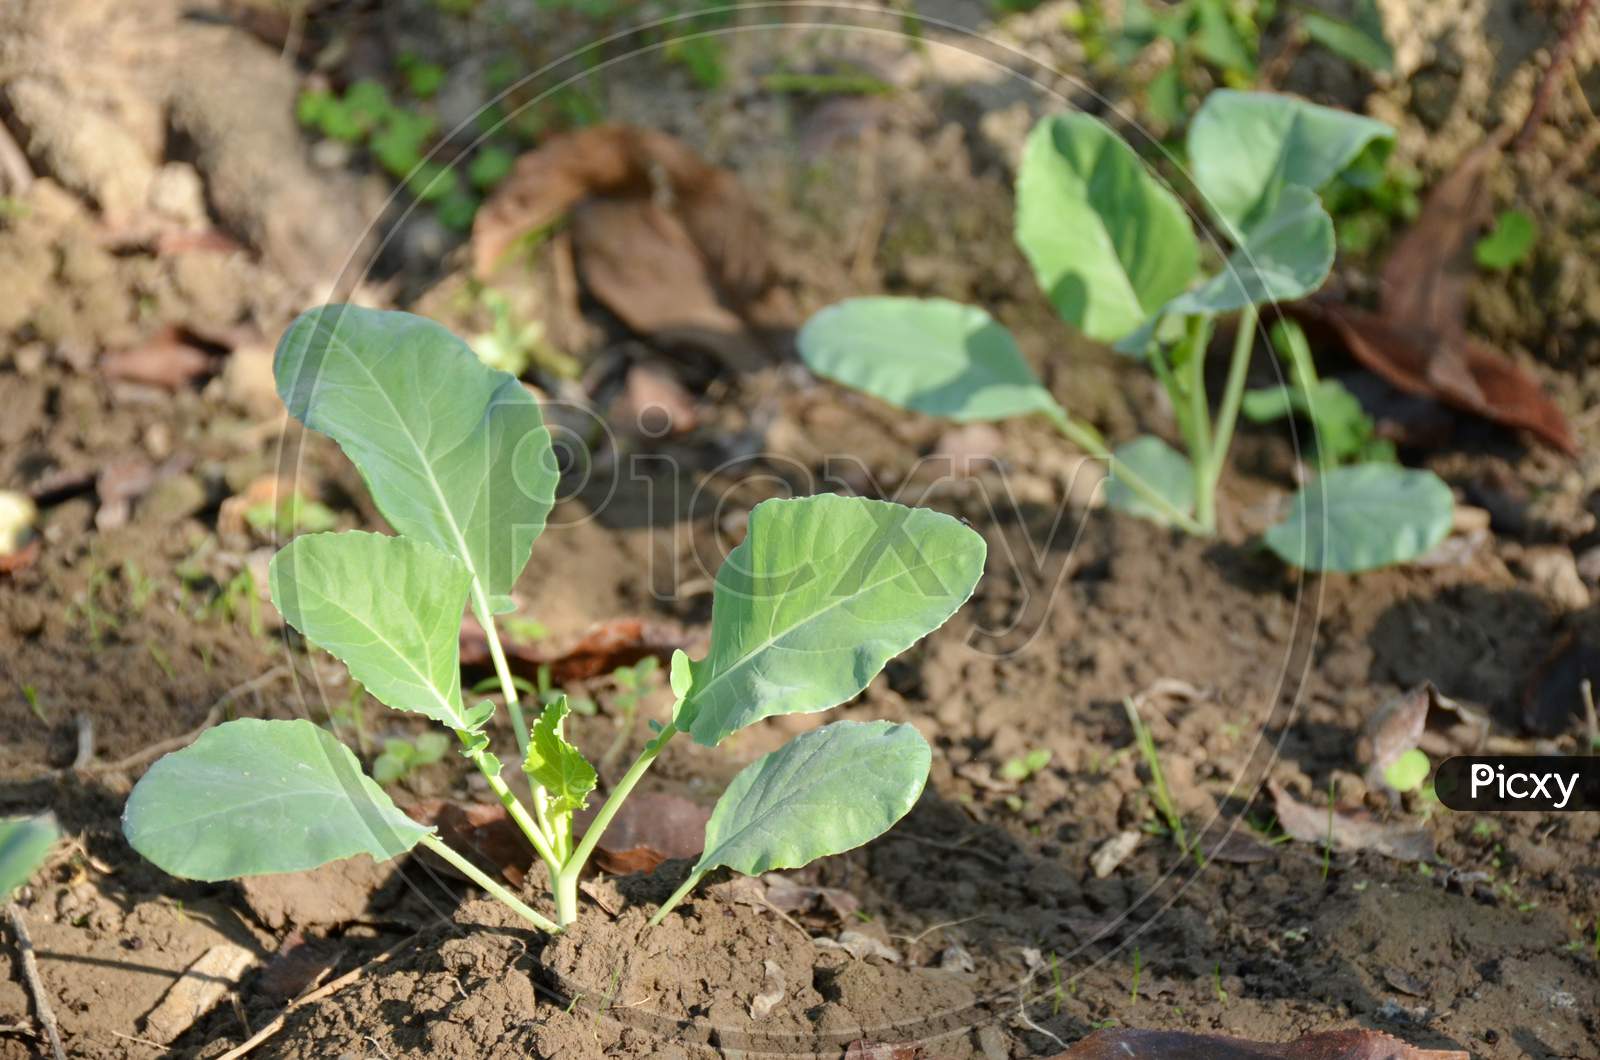 The Small Ripe Green Cabbage Plant Seedlings In The Garden.